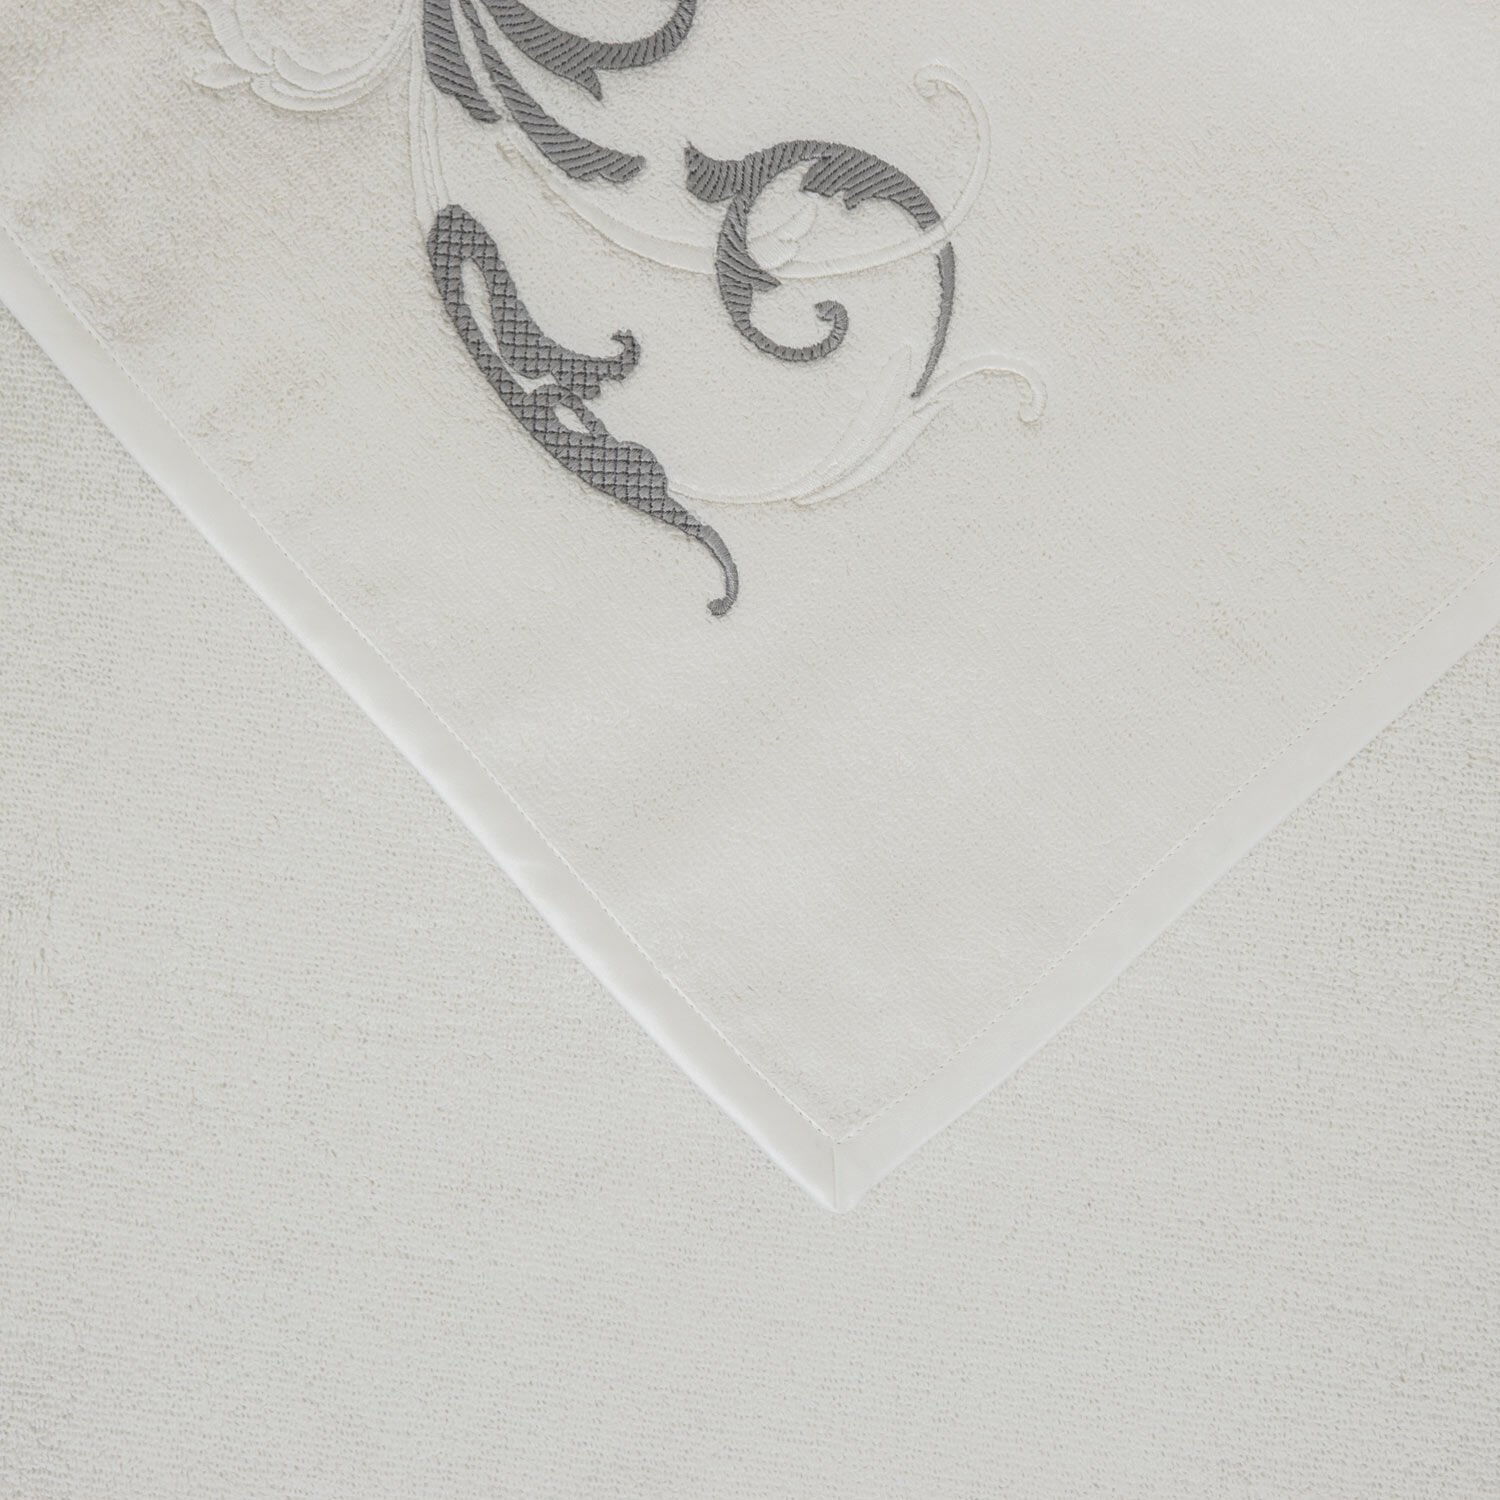 Tracery Embroidered Bath Sheet